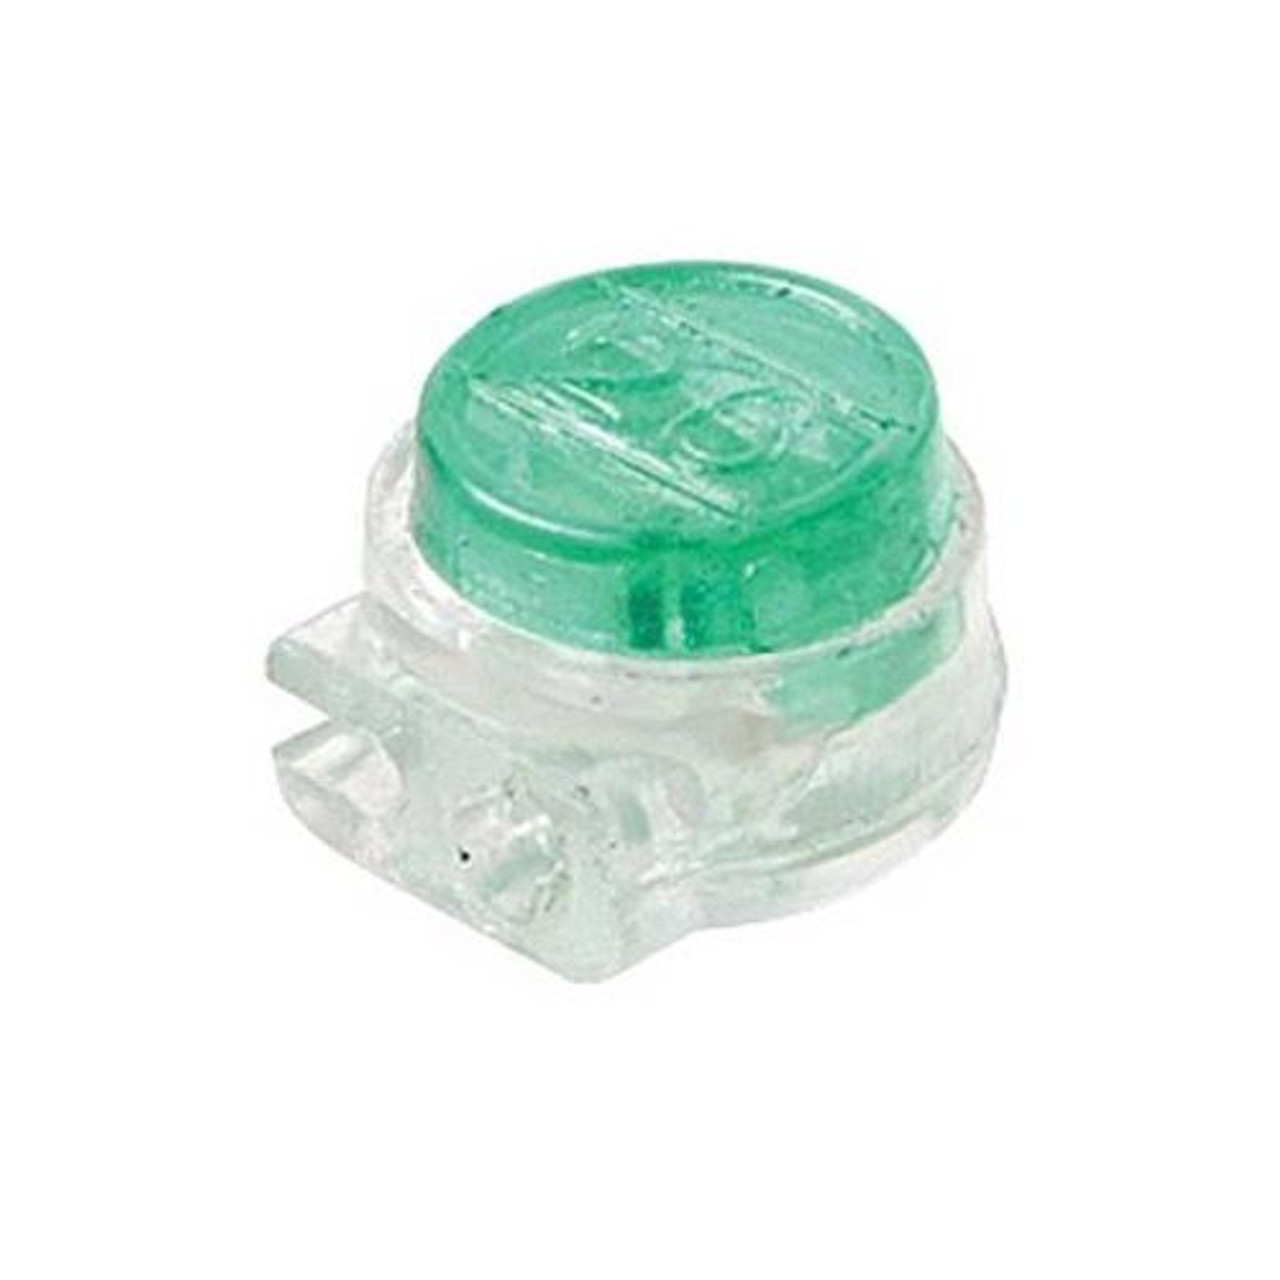 Eagle UG Butt Tap Connector Green IDC Modular Telephone Gel-Filled 19 - 26 AWG 3M Type 1 Pack Wire Conductor Data Signal Cable Squeeze Crimp Audio Connectors